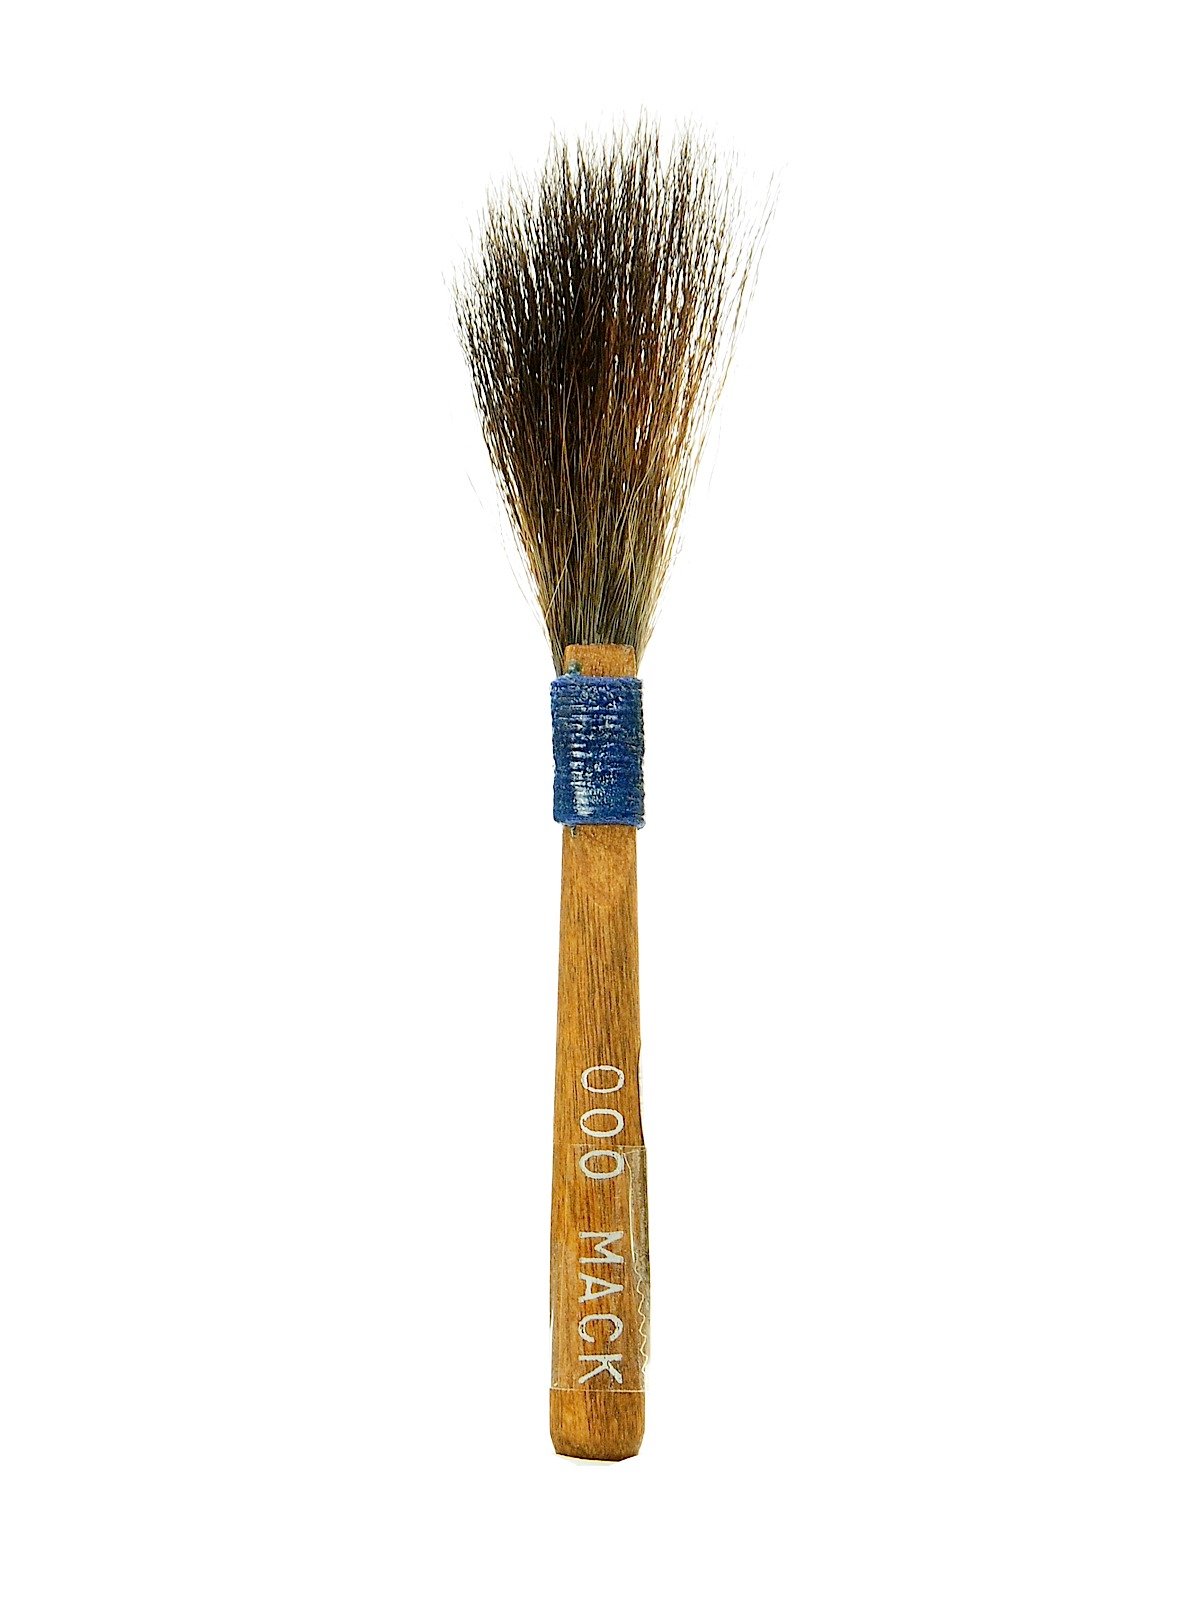 FB-00 #00 – Pinstriping Brush by Andrew Mack - Finesse Pinstriping